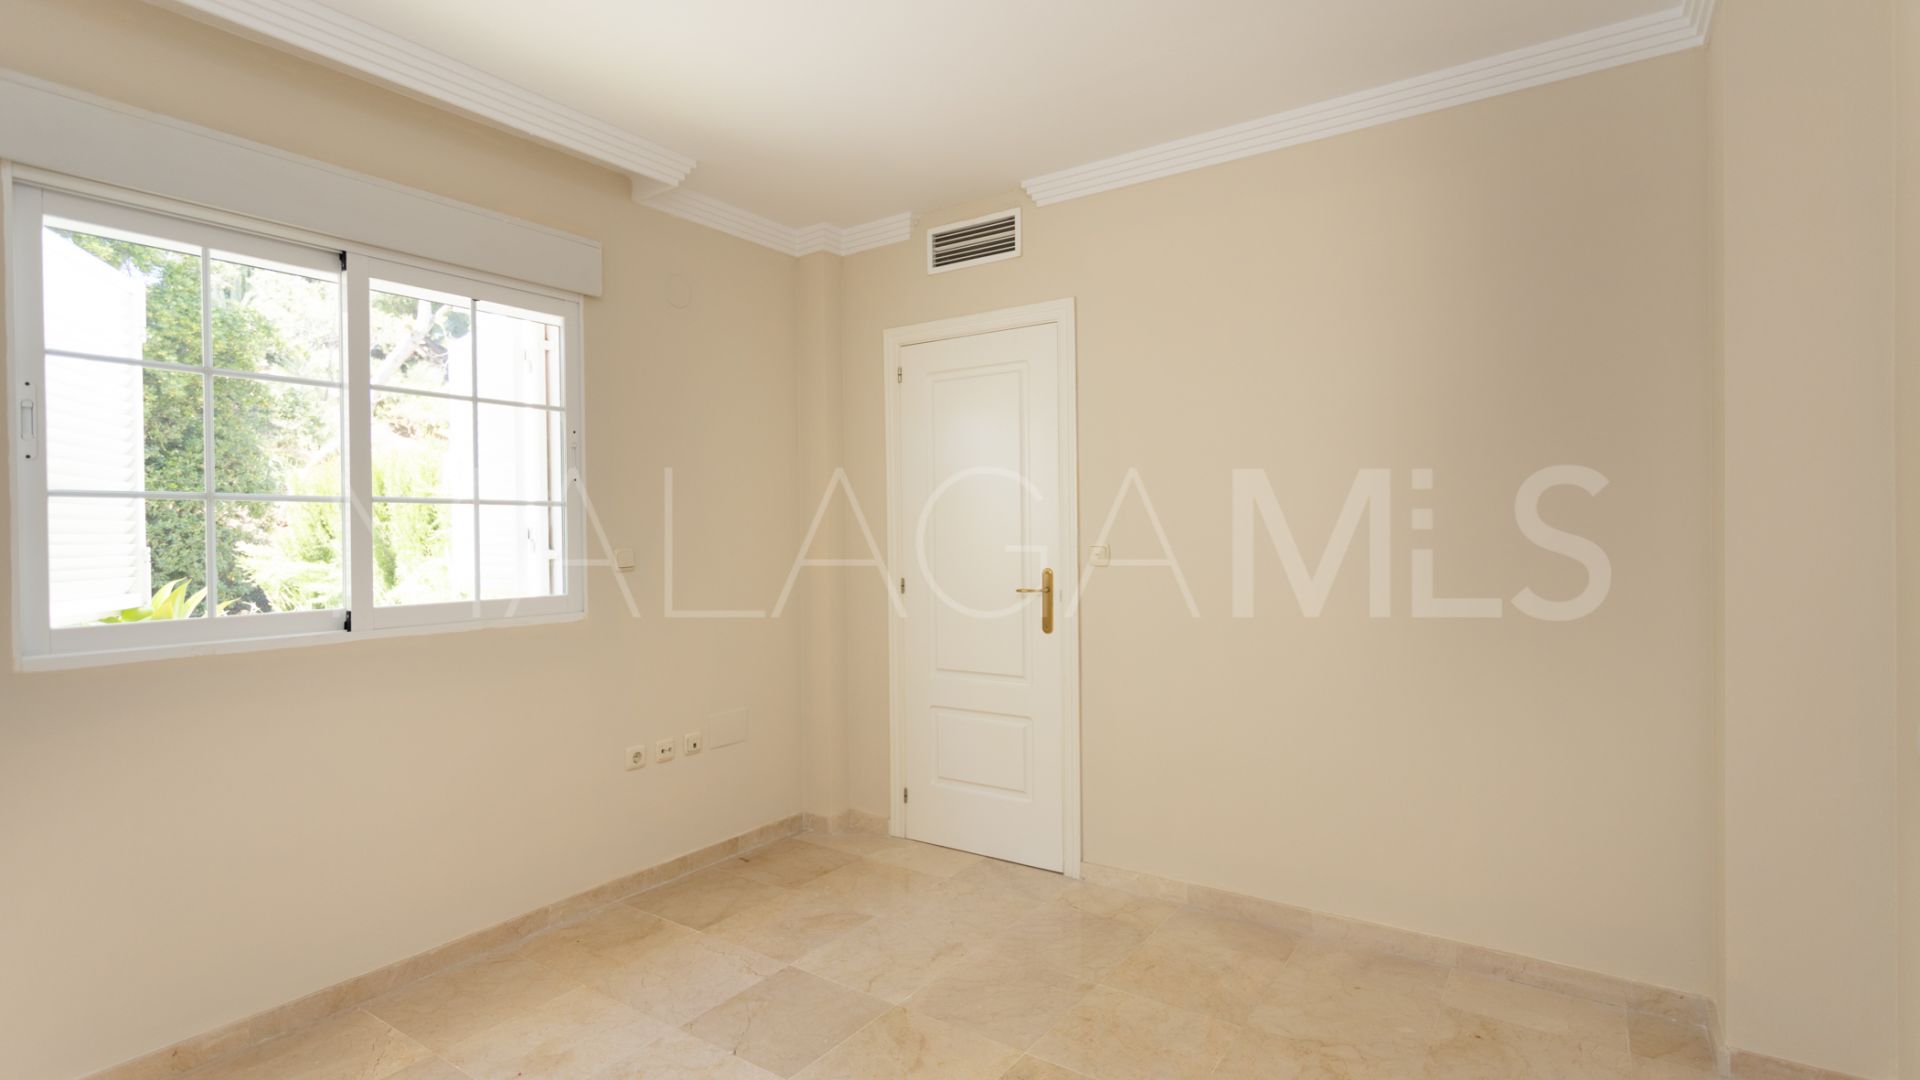 For sale apartment with 1 bedroom in Rio Real